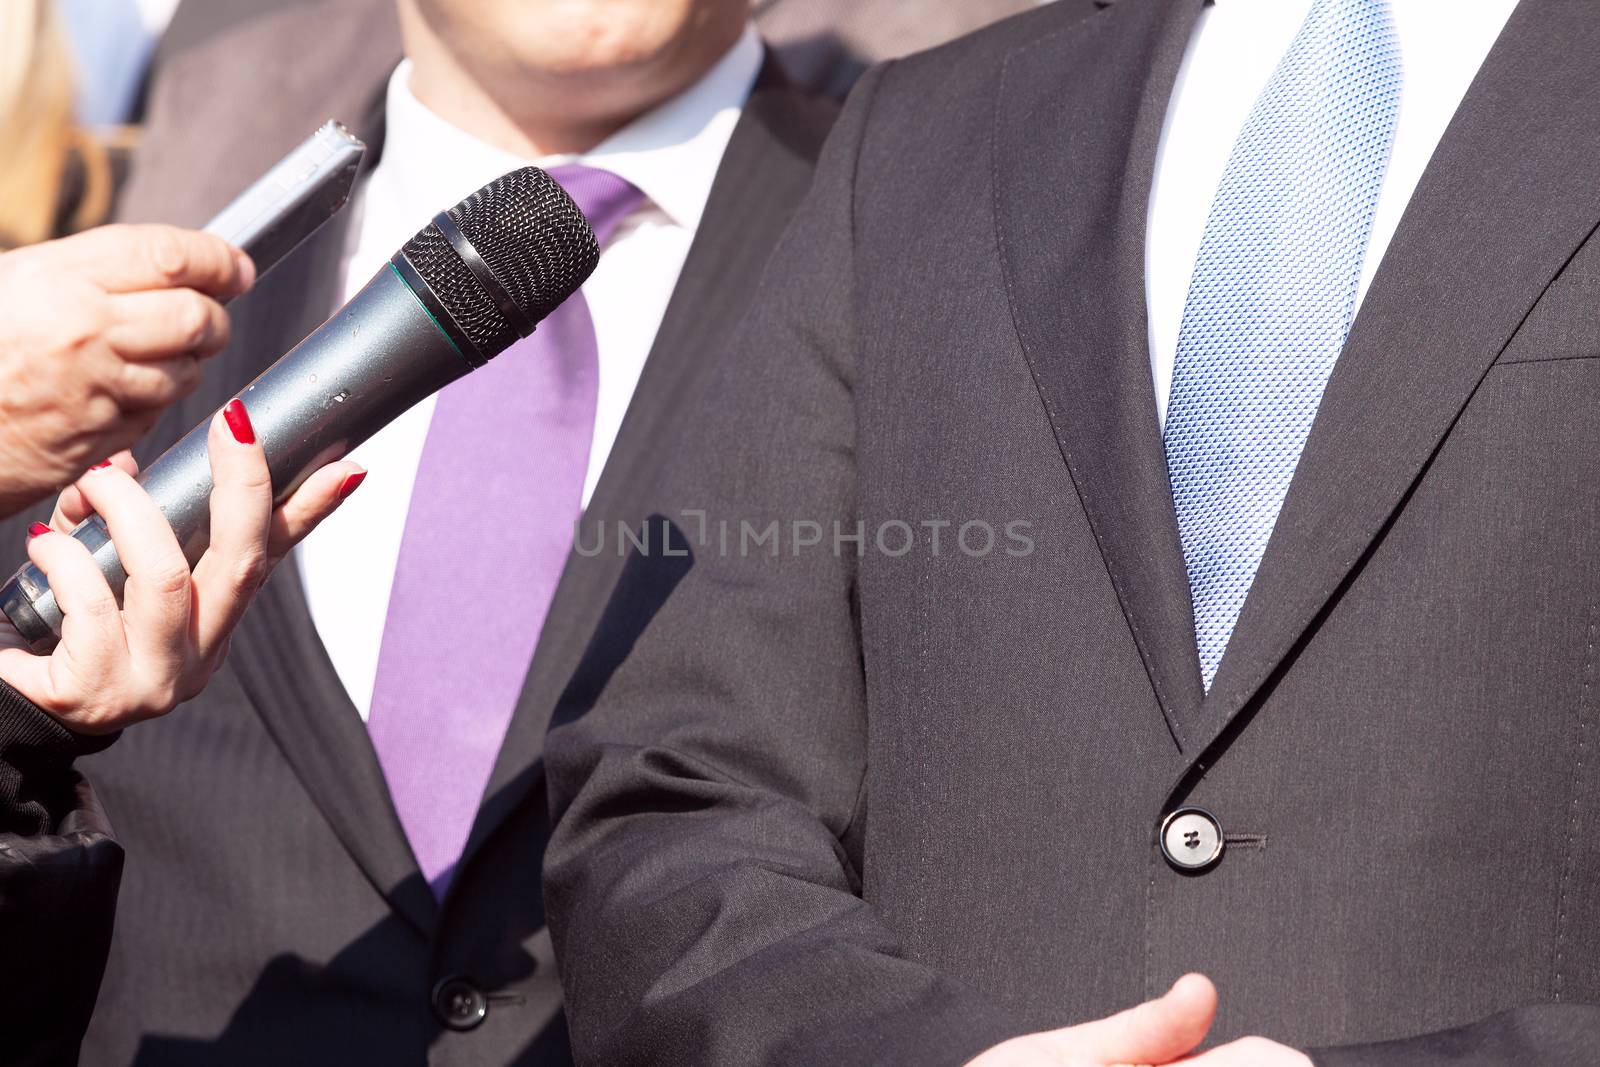 Media interview with businessman or politician by wellphoto